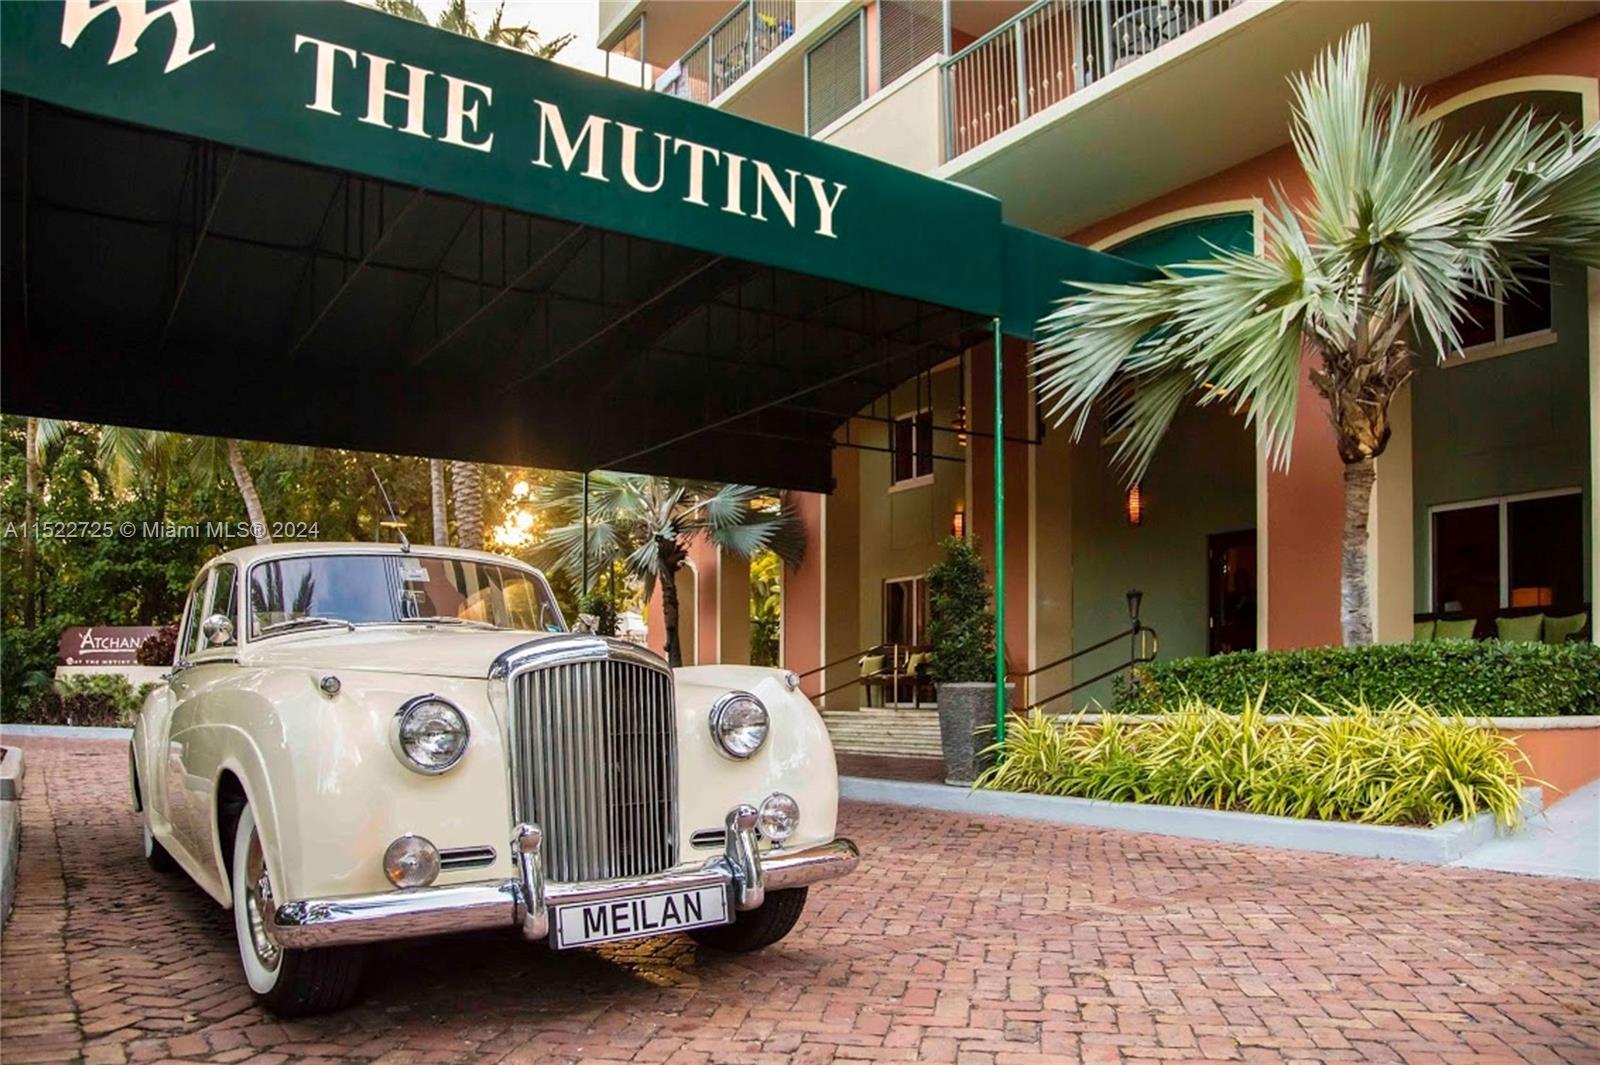 The Mutiny is one of the known best locations in Miami and Coconut Grove.  It is located across Biscayne Bay, Marina, Peacock Park, and the new Regatta Harbour with restaurants, bars, and music.  
This 1 bed/1 bath has all the conveniences in the house, enjoying a restaurant, pool, fitness center, and Conference room.   Coconut Grove is always youthful and it has an active life with Michelin restaurants, boutiques, Coco Walk, and nice supermarkets like Fresh Market.  The owner is ready to negotiate.